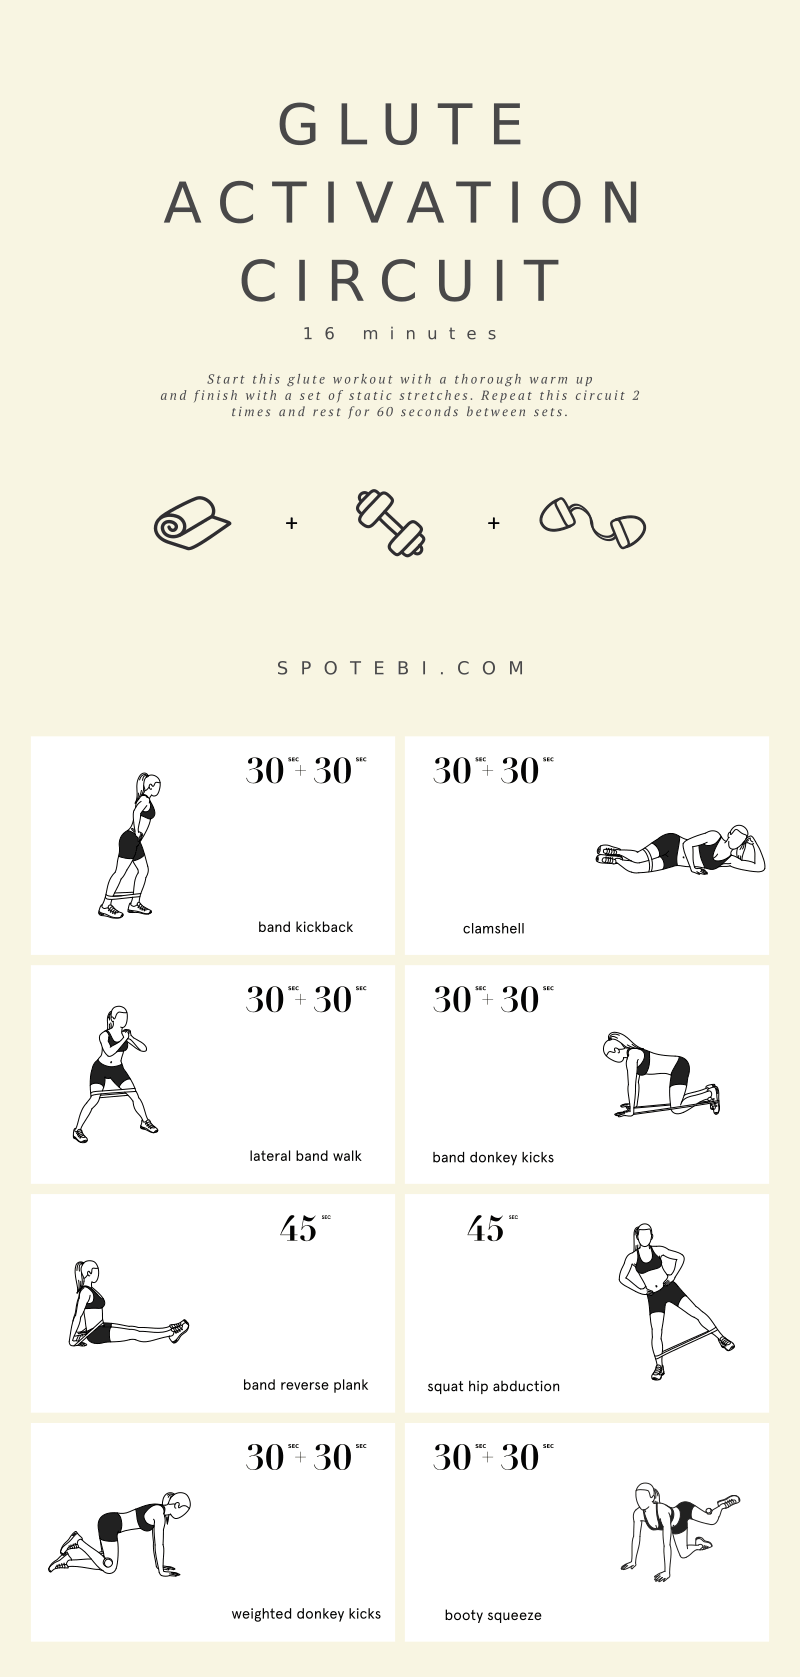 Did you know that dormant or inactive glutes are probably the main reason why most people struggle to grow their booty? If this is you, then this 16-Minute Glute Activation Circuit is going to wake up all three major muscles in your bum! https://www.spotebi.com/workout-routines/16-minute-glute-activation-circuit/